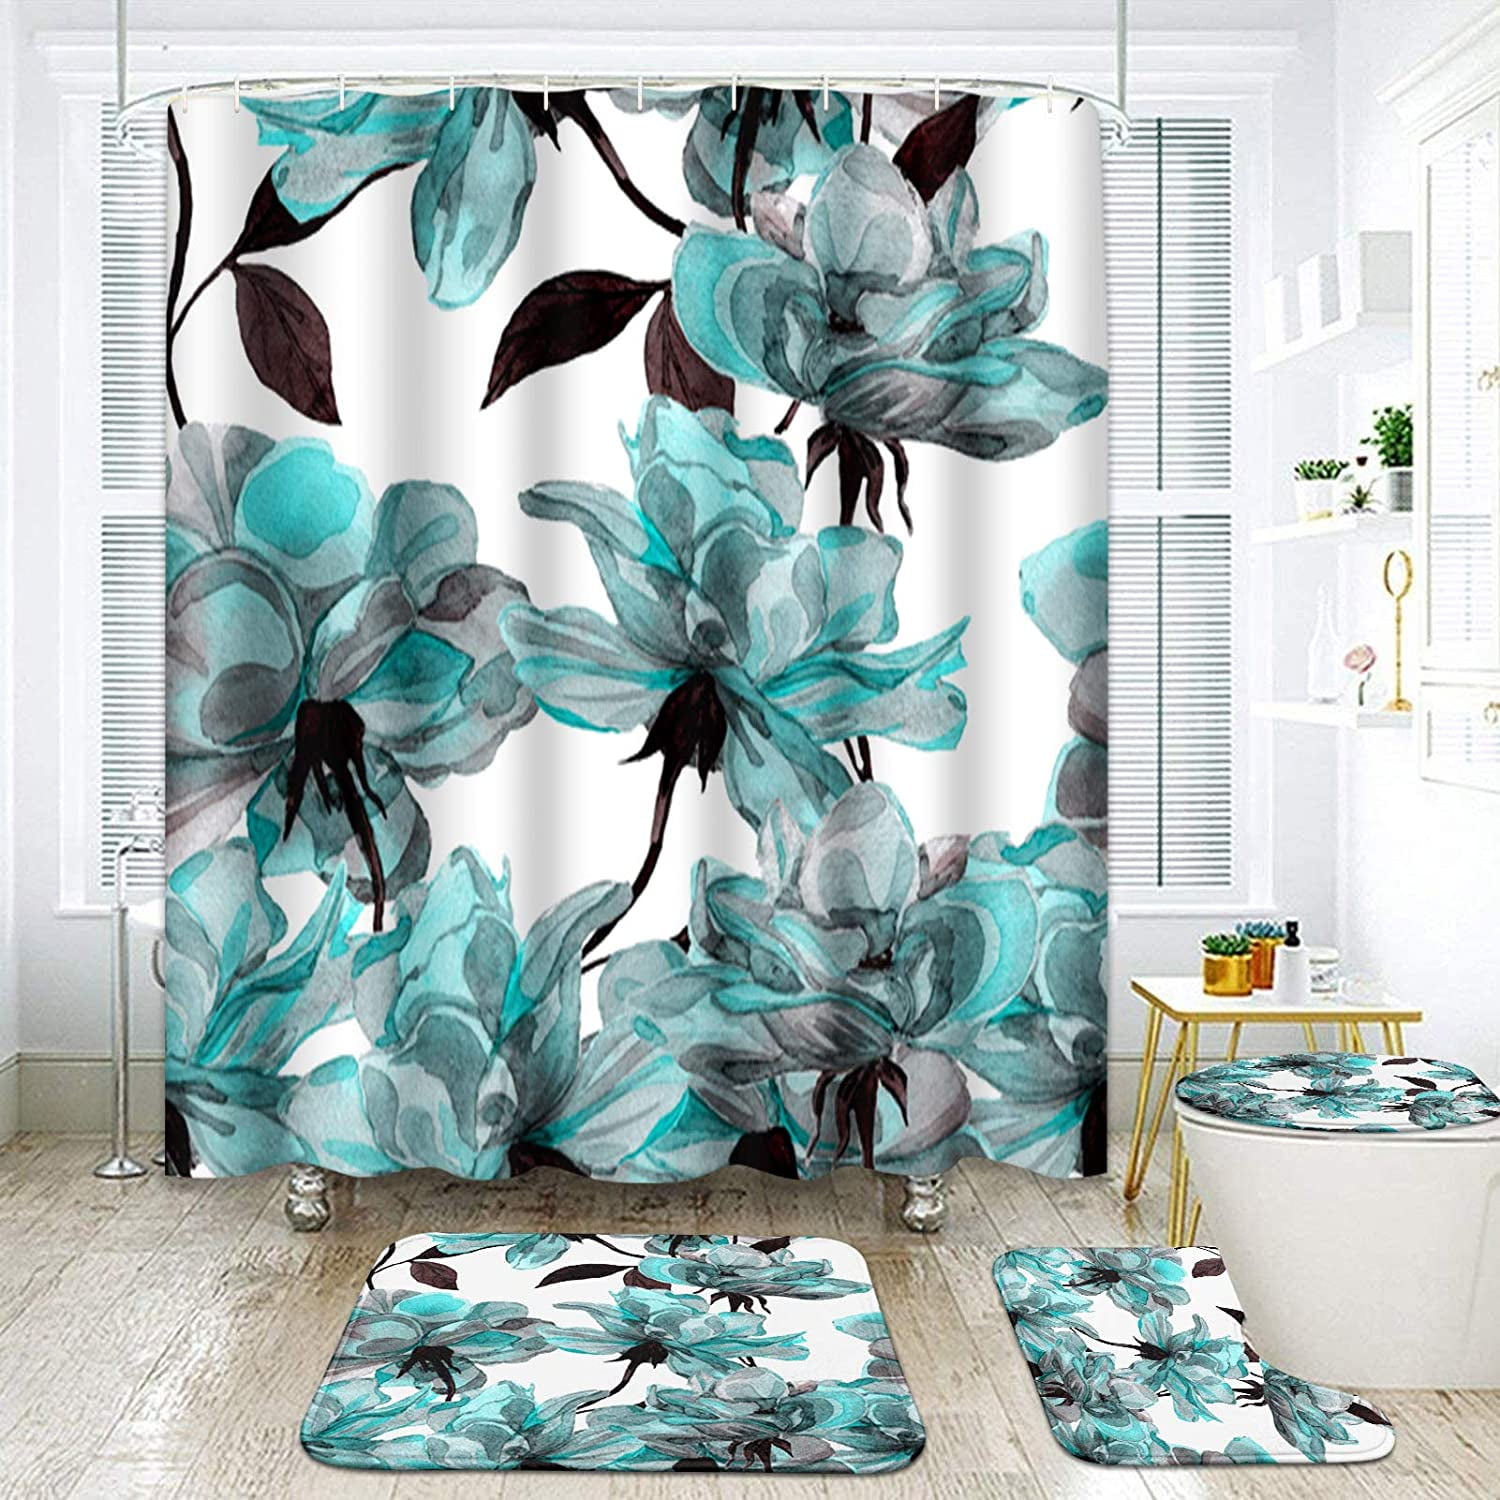 Details about   US Beautiful Girl Shower Curtain Non-Slip Bathroom Toilet Seat Lid Cover Mat Set 